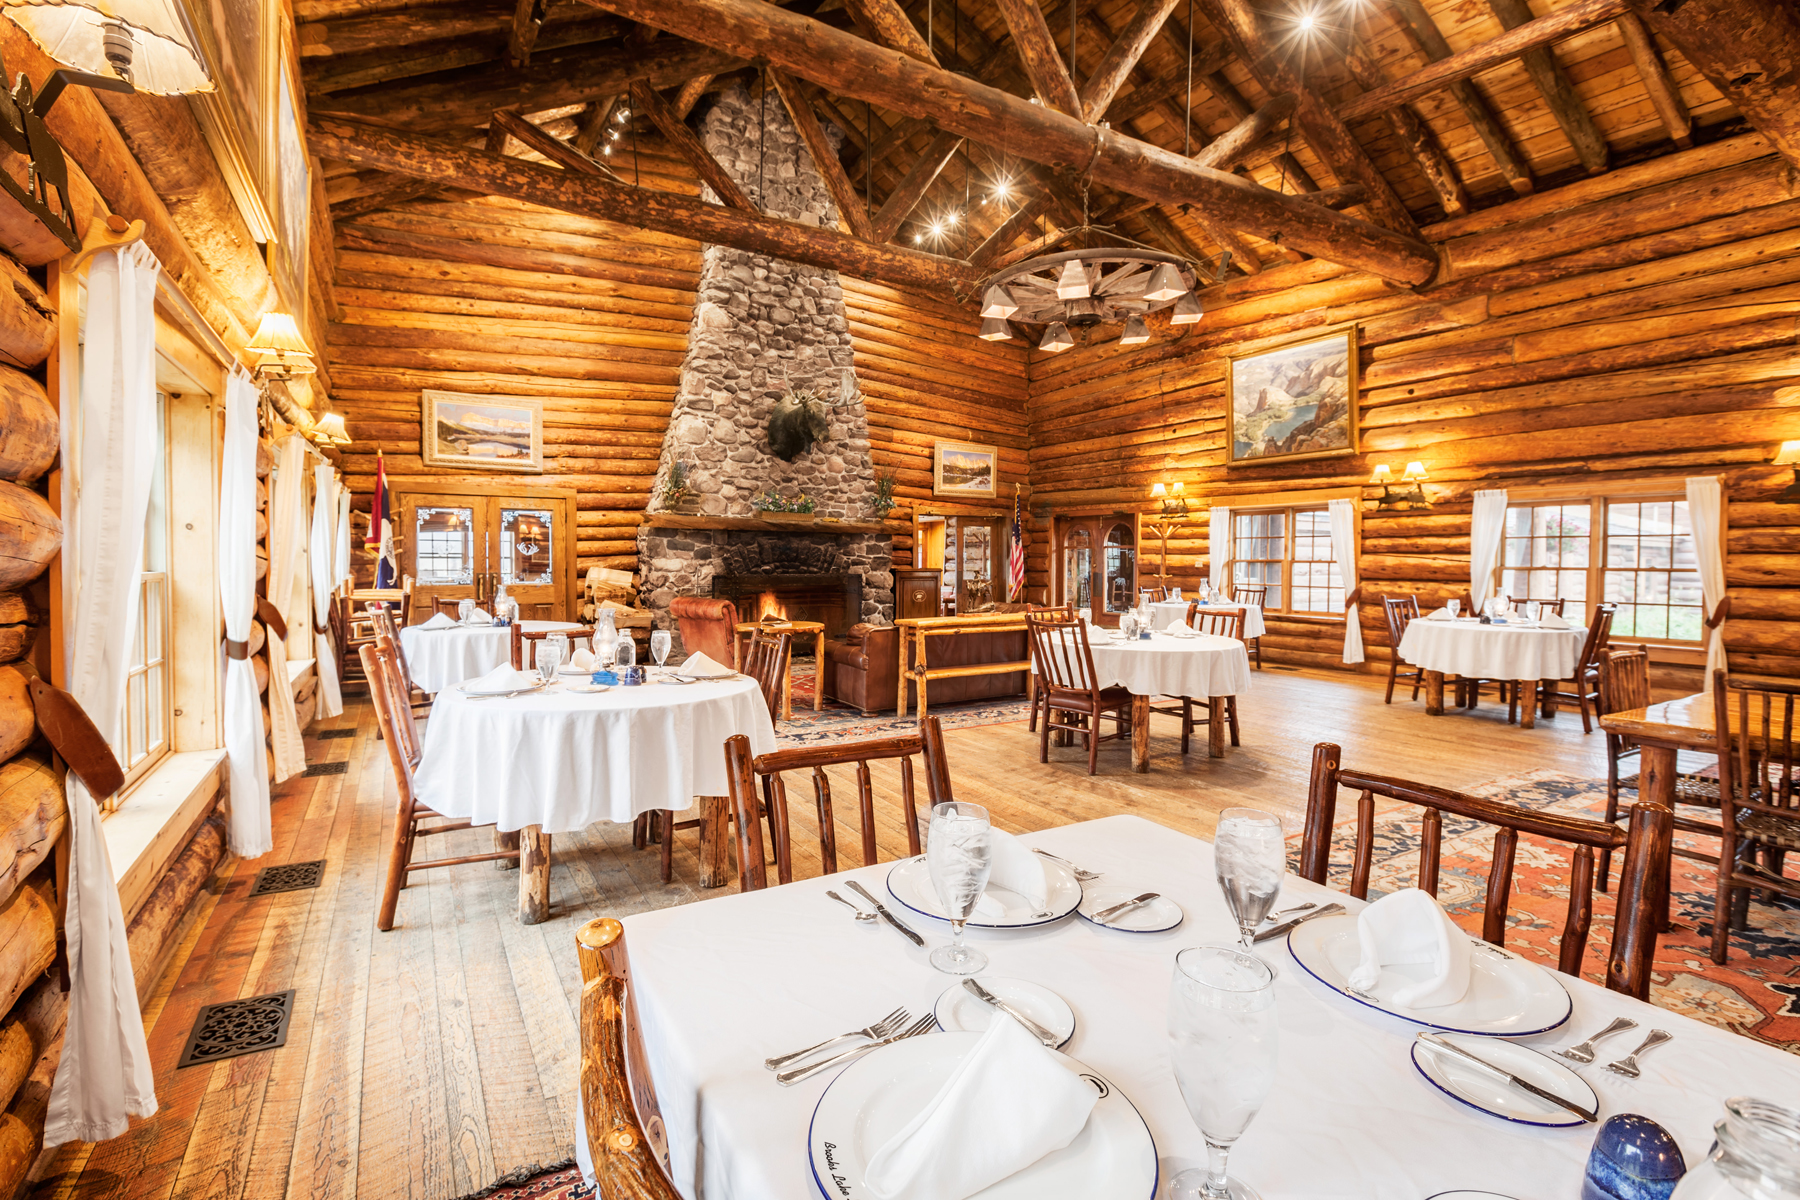 All meals created by the resort’s acclaimed Executive Chef Whitney Hall are included with an overnight stay and served in Brooks Lake Lodge’s historic dining room next to a crackling fire.